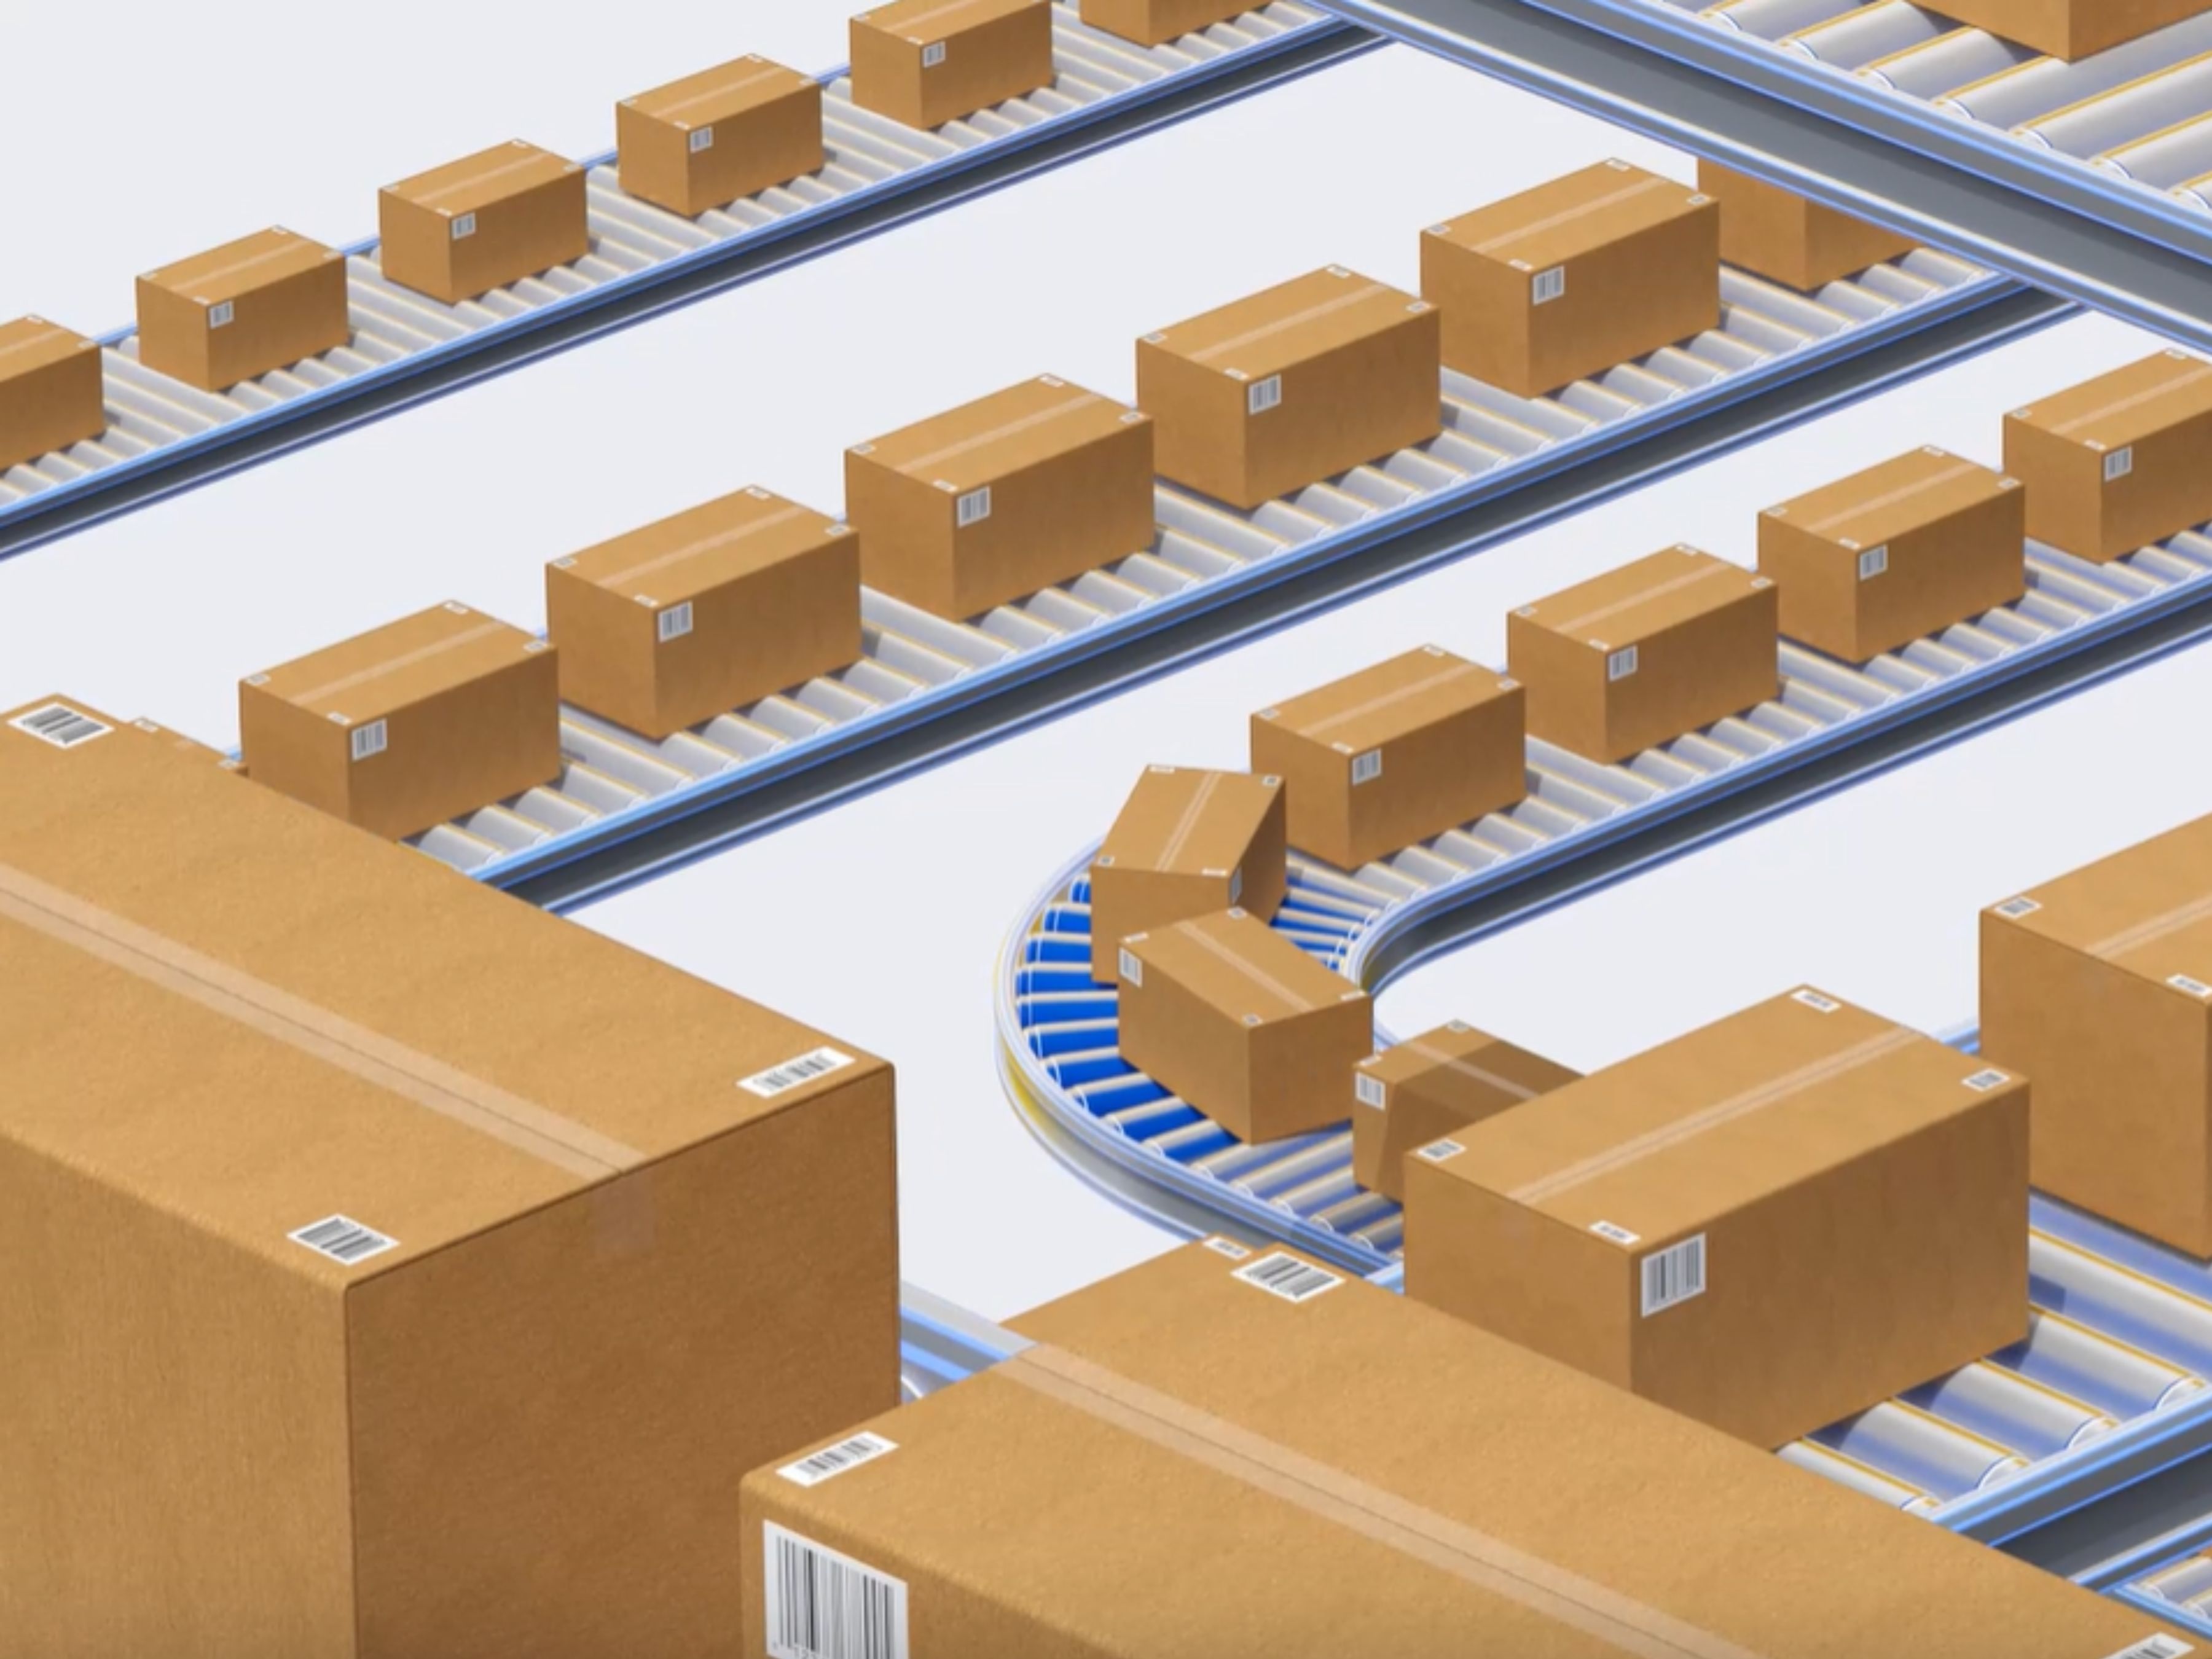 Machine Vision Solutions for Warehouse